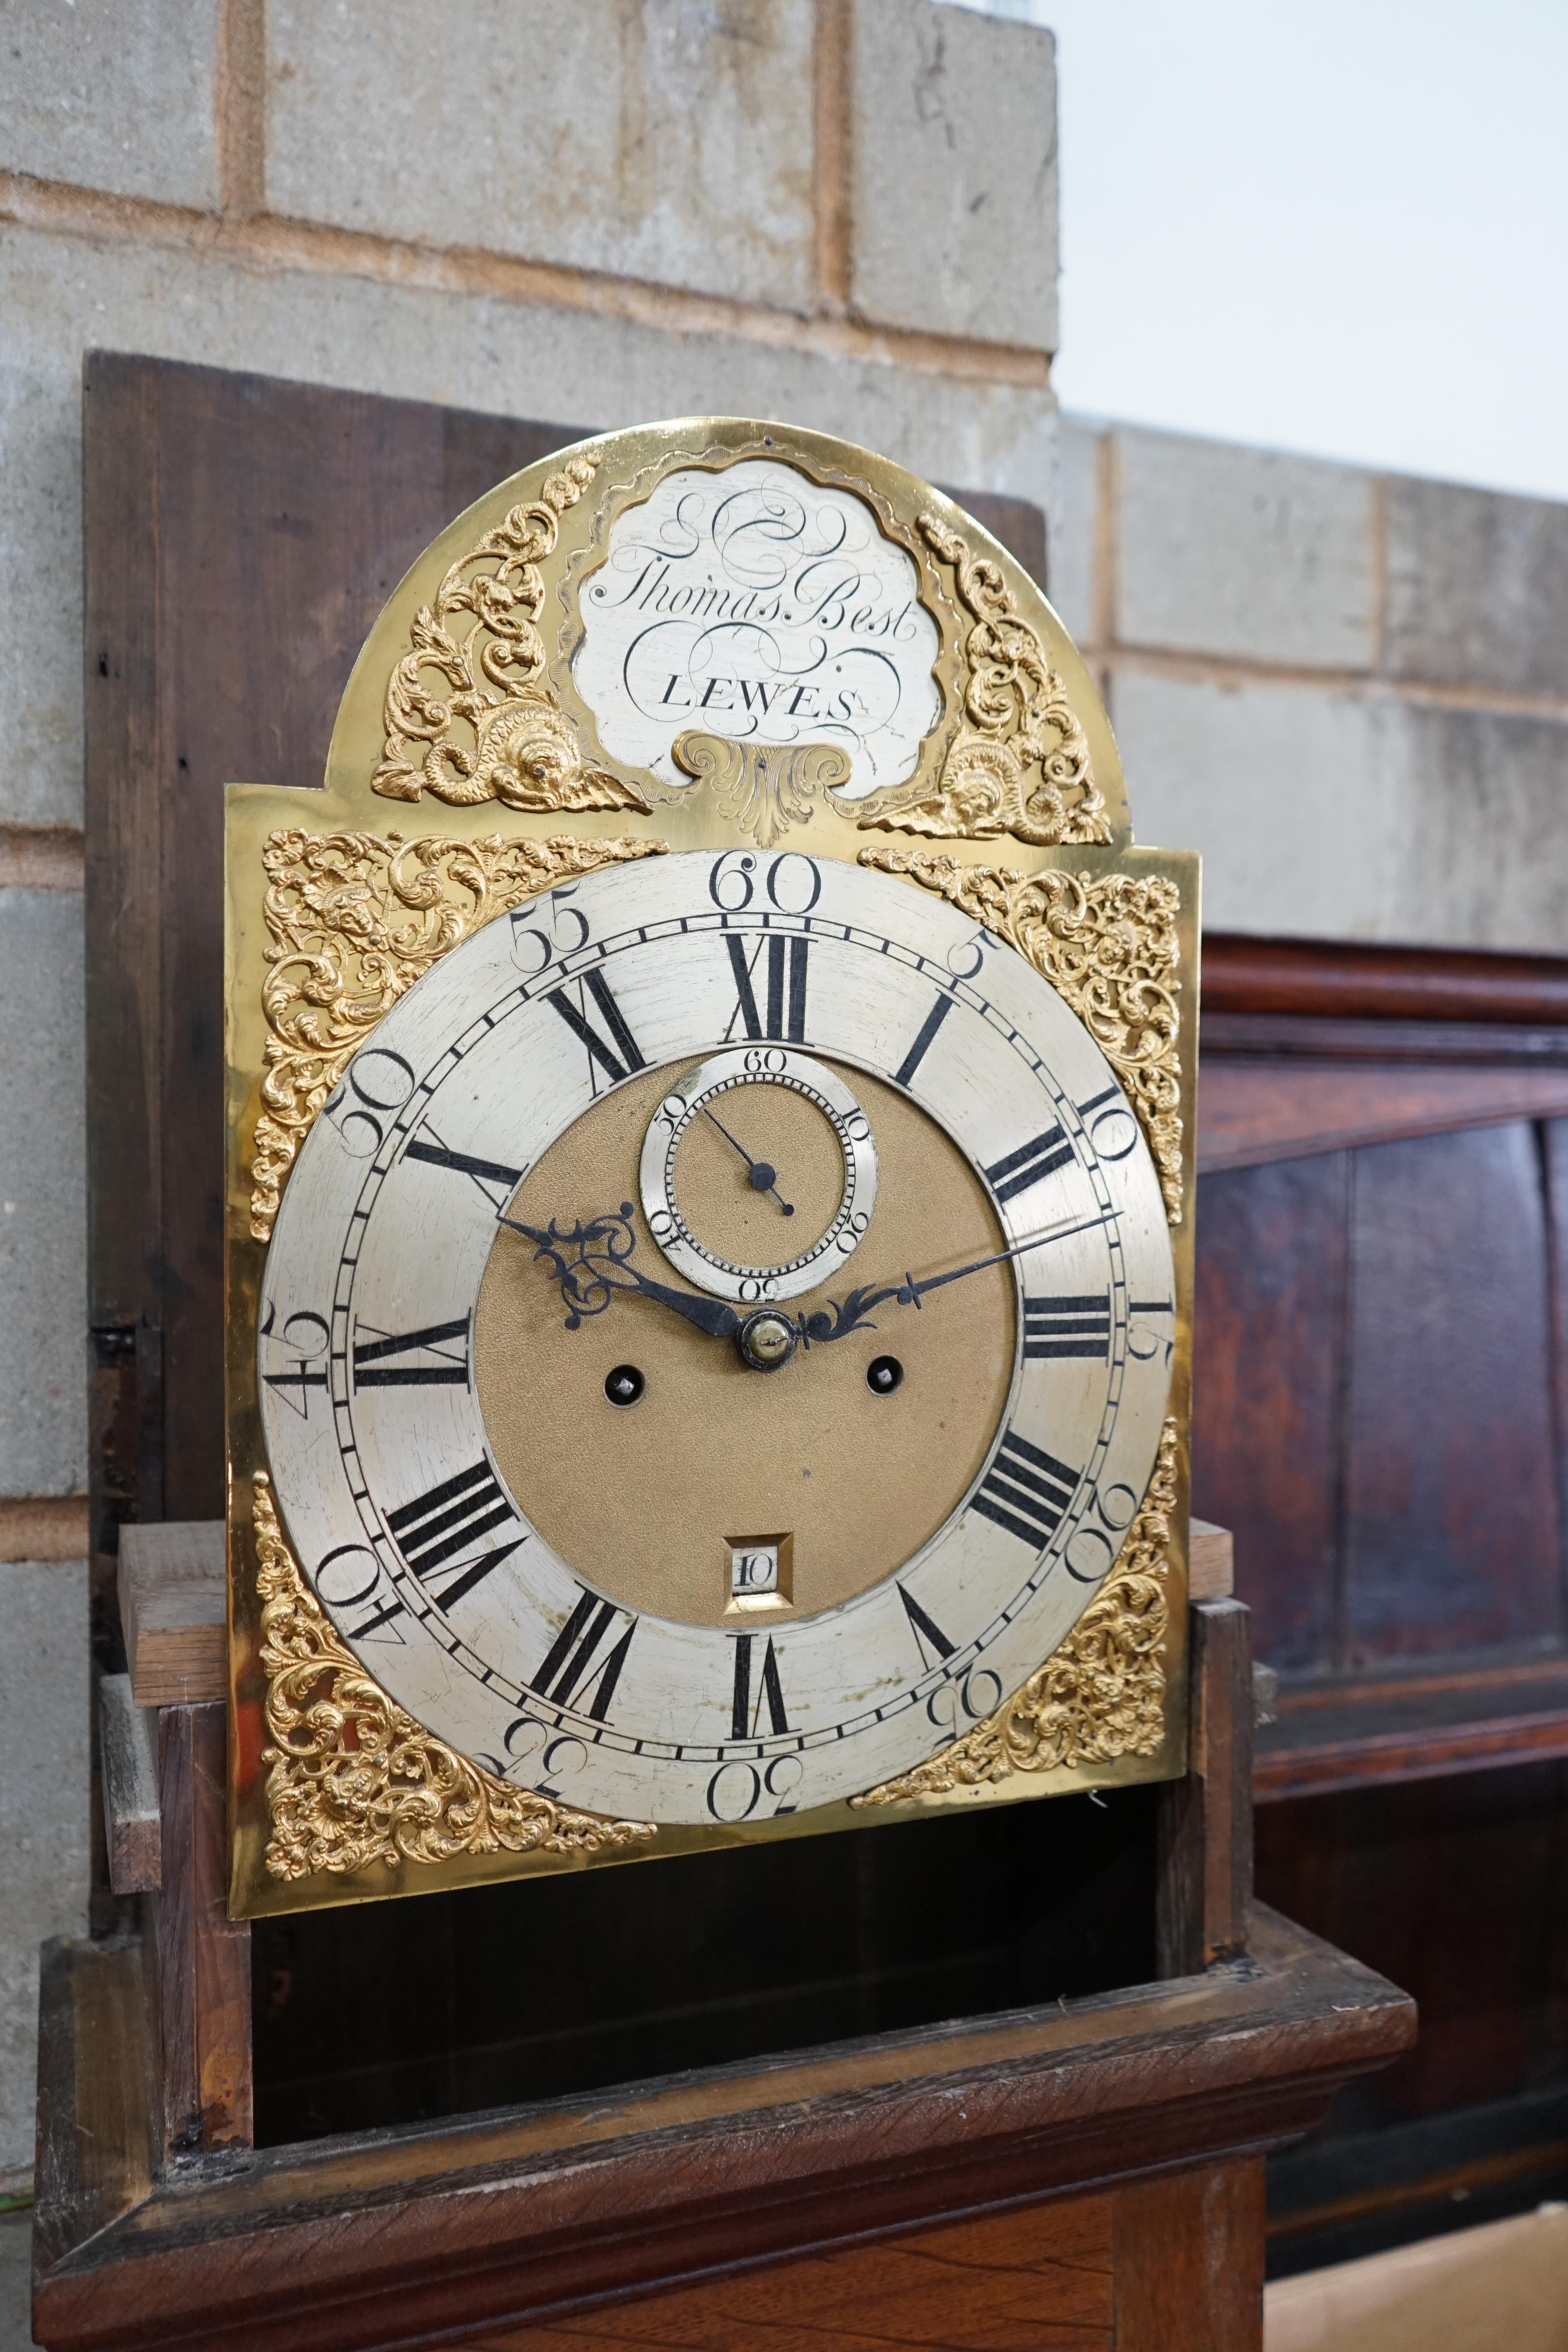 An early 19th century inlaid oak eight day longcase clock by Thomas Best, Lewes (no weights), height 211cm